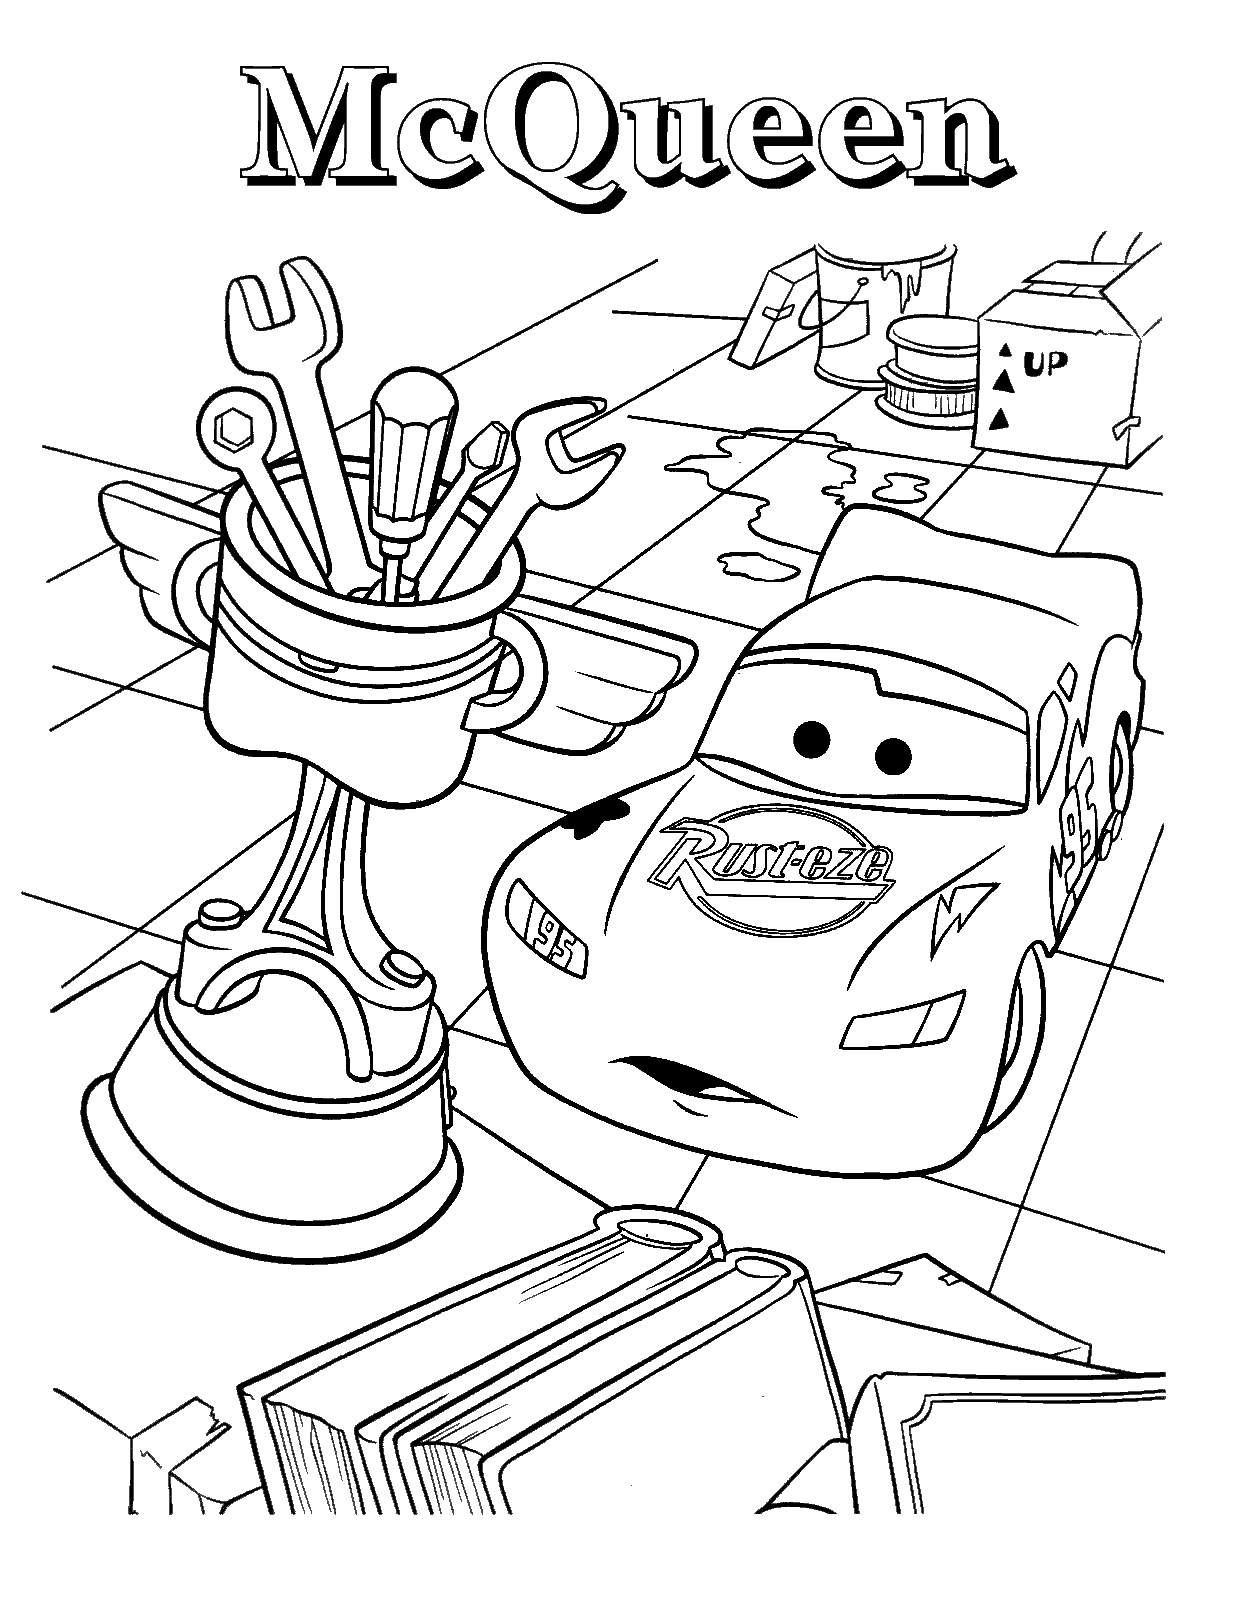 Free Printable Lightning McQueen Coloring Pages For Kids Best Coloring Pages For Kids